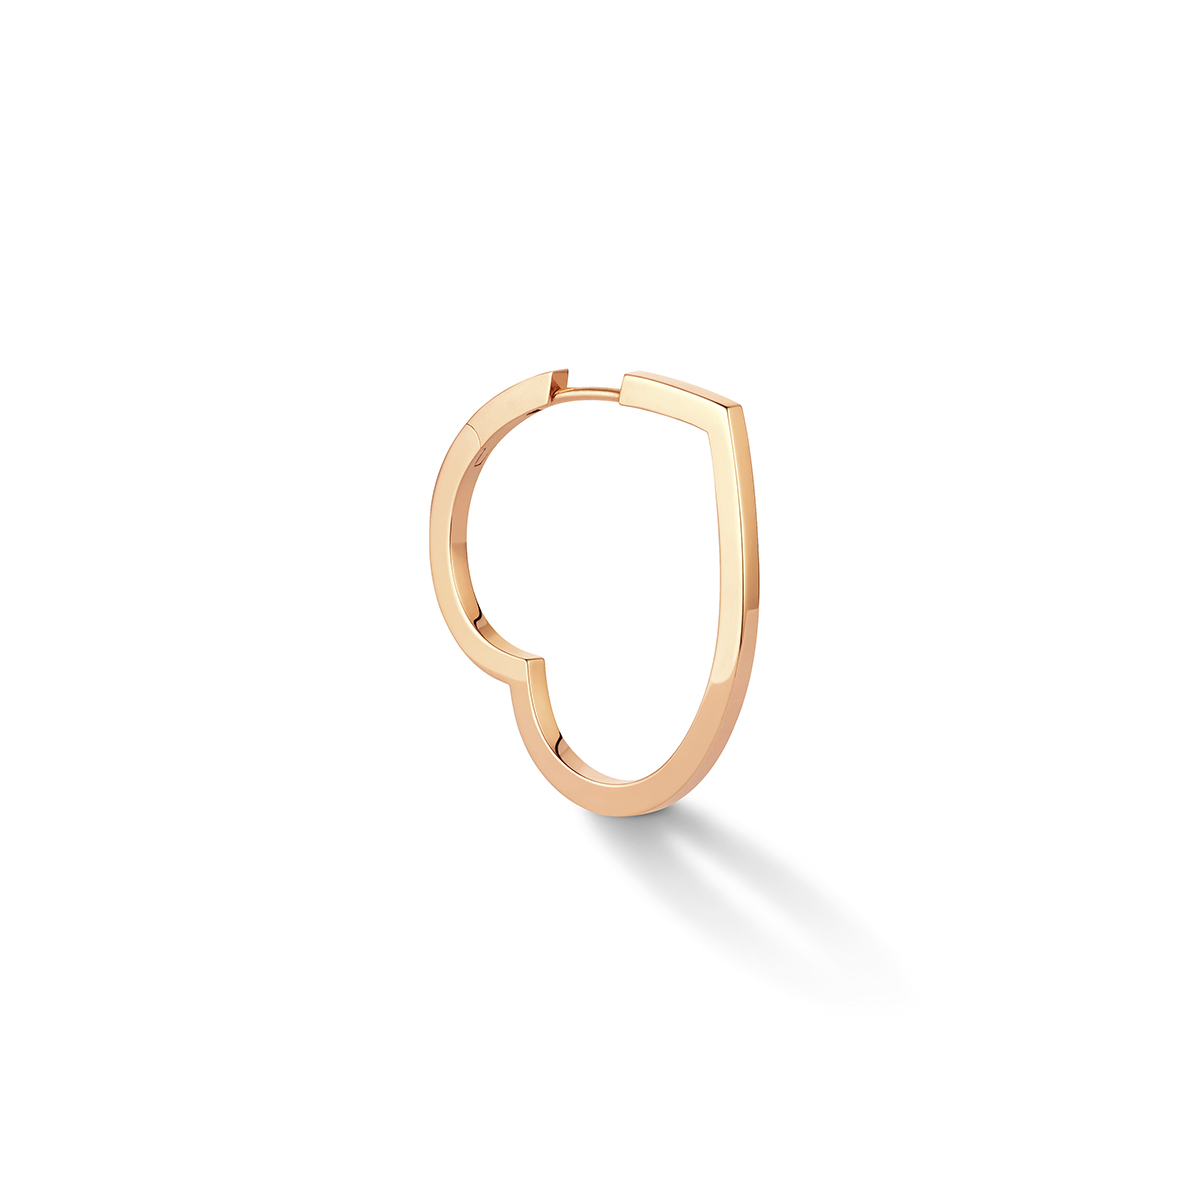 A heart shaped rose gold ring